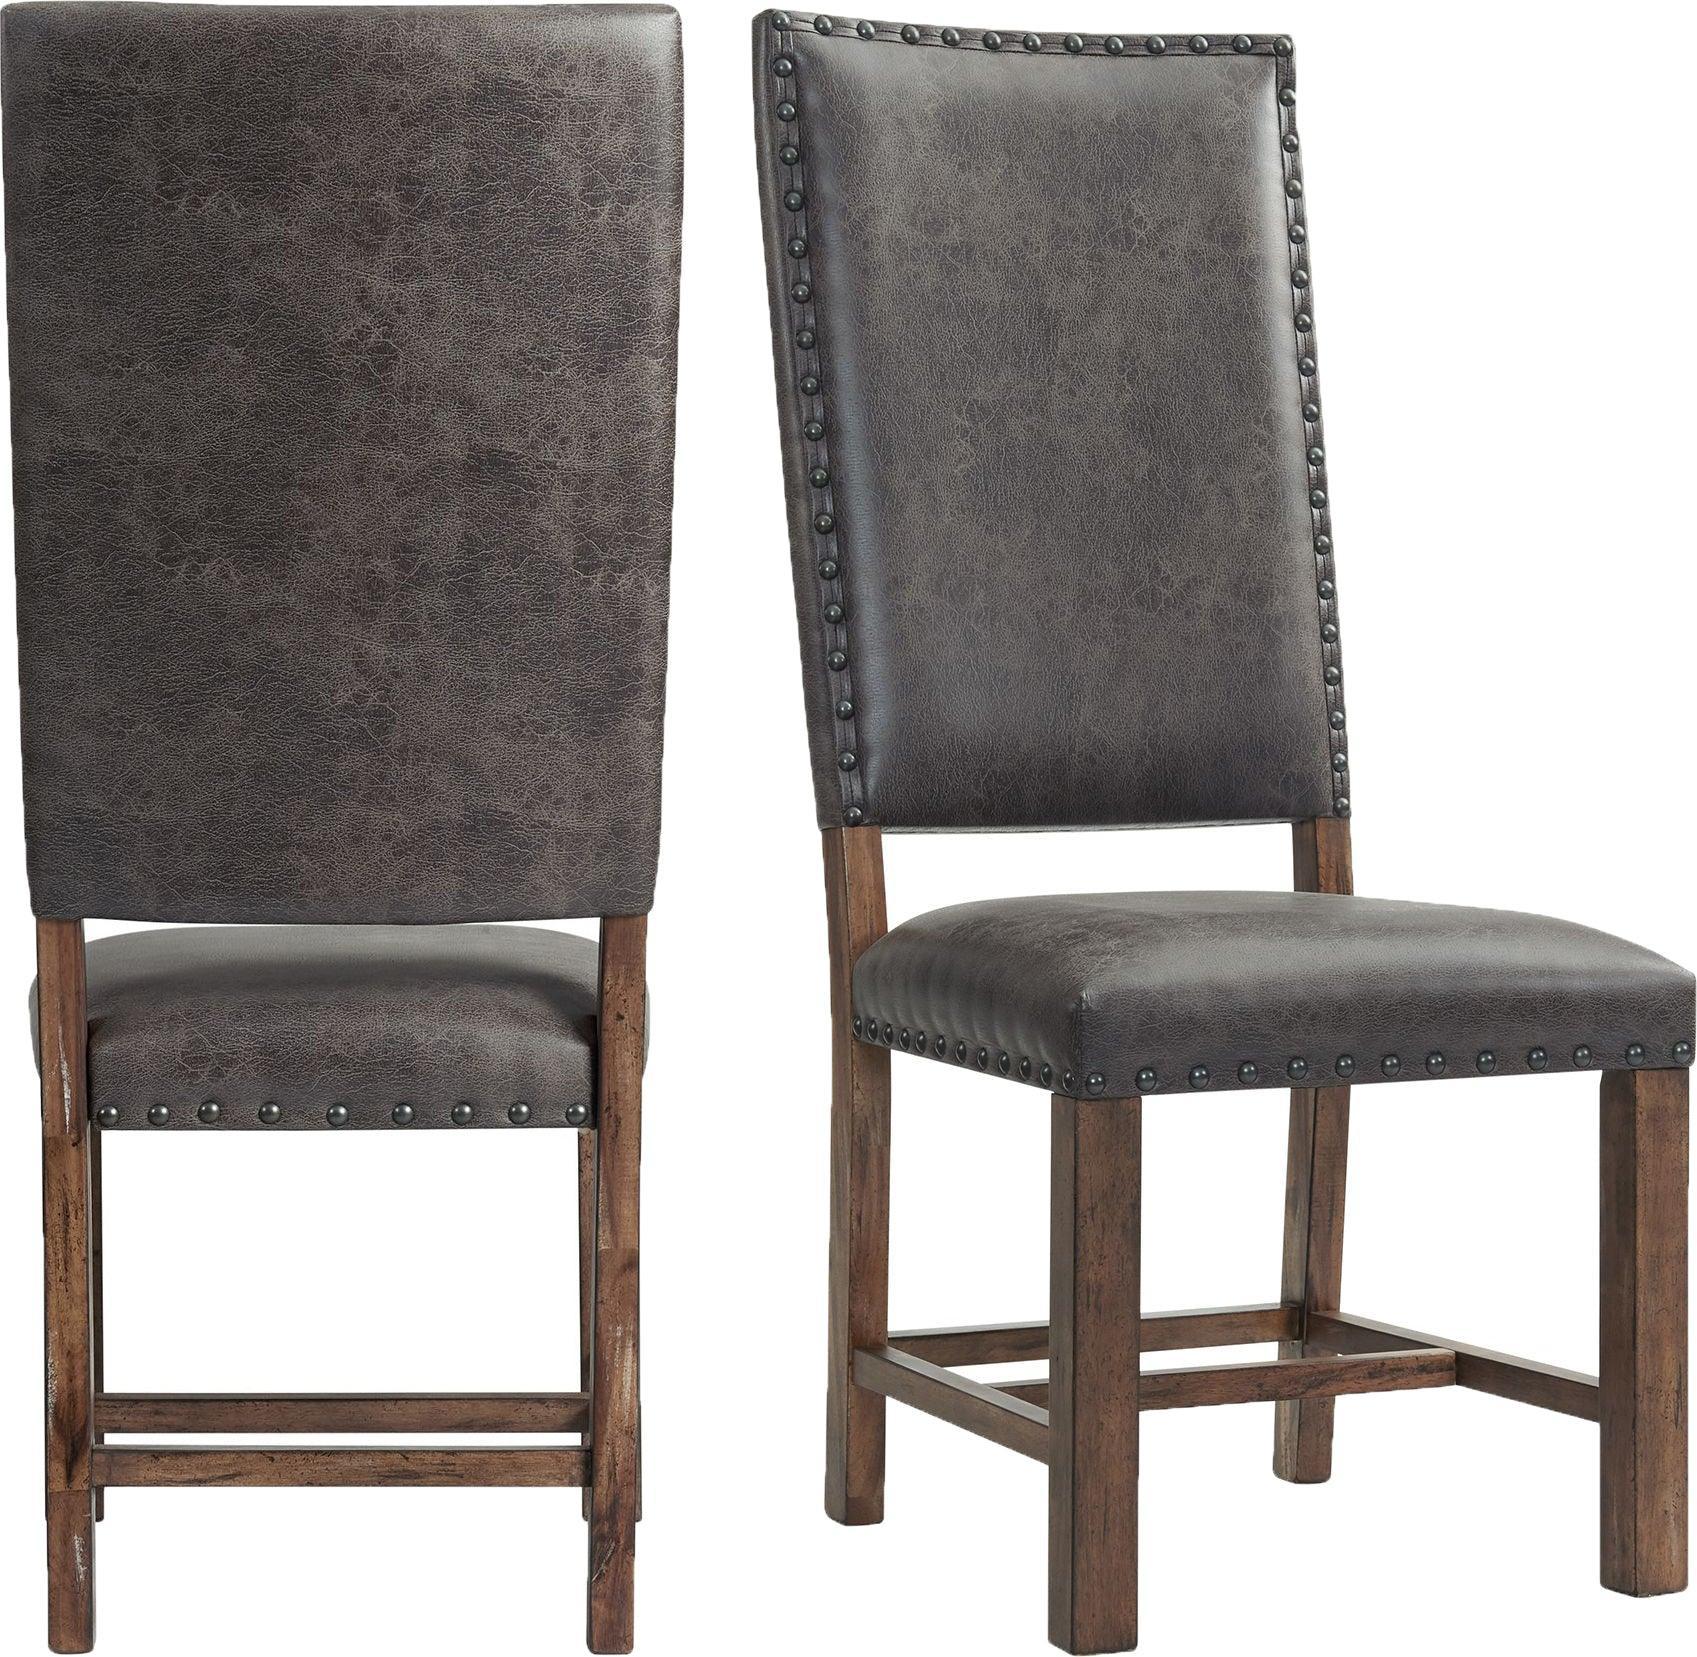 Elements Dining Chairs - Hayward Tall Back Side Chair Set (Set of 2)